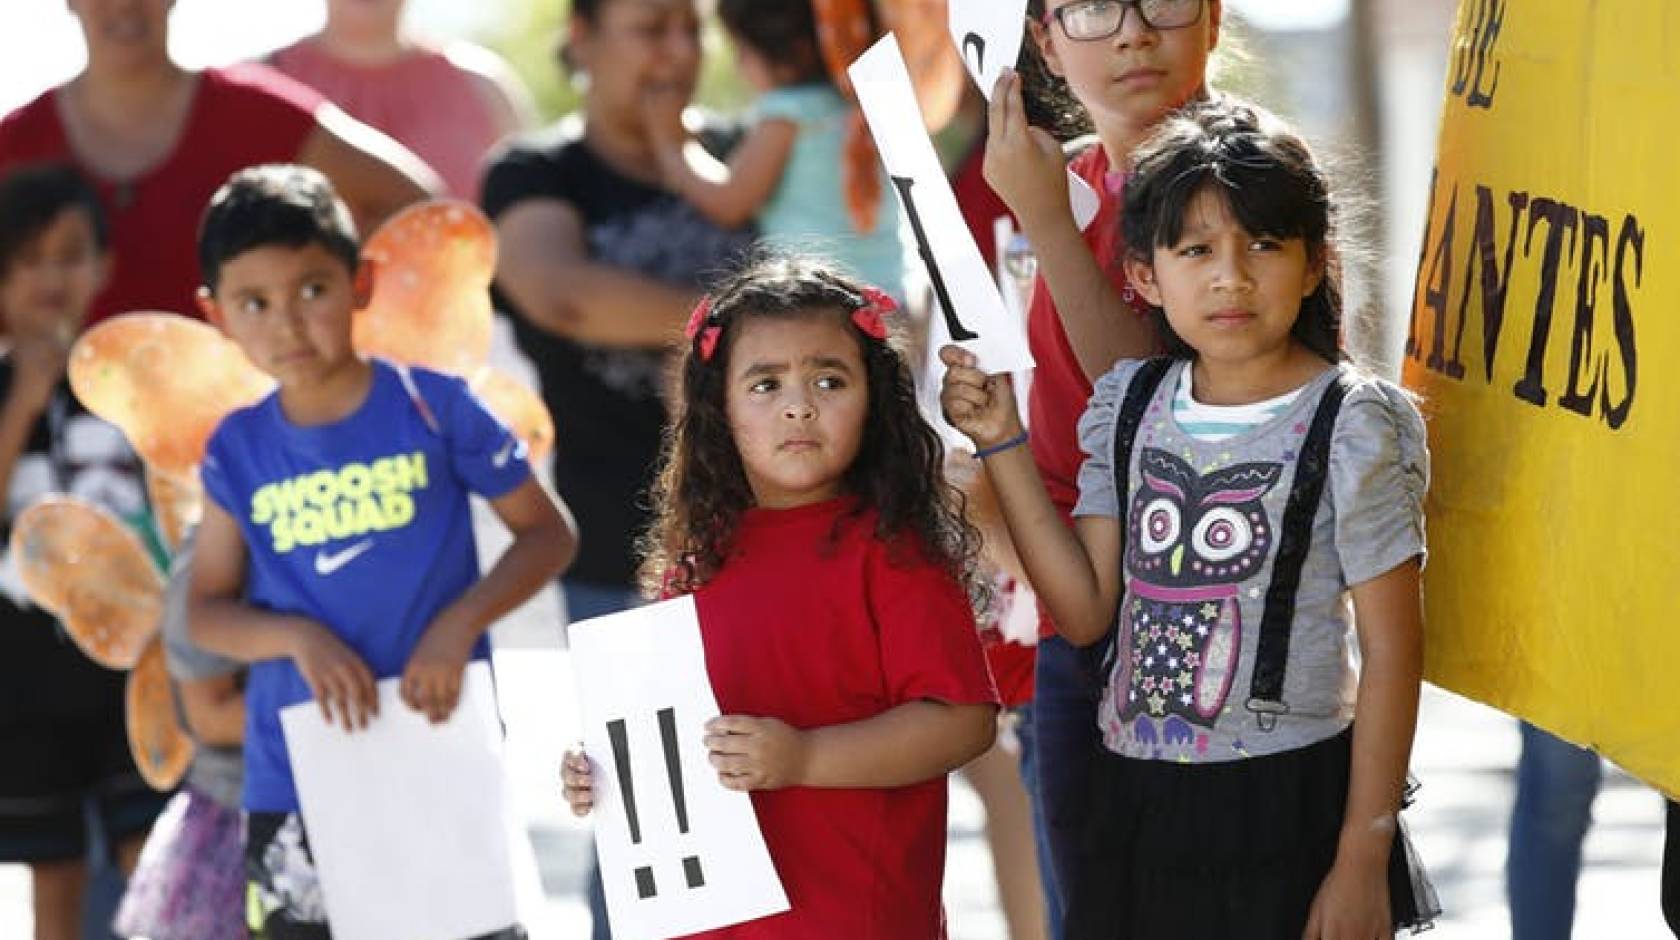 Children at an immigrant family separation protest in Phoenix